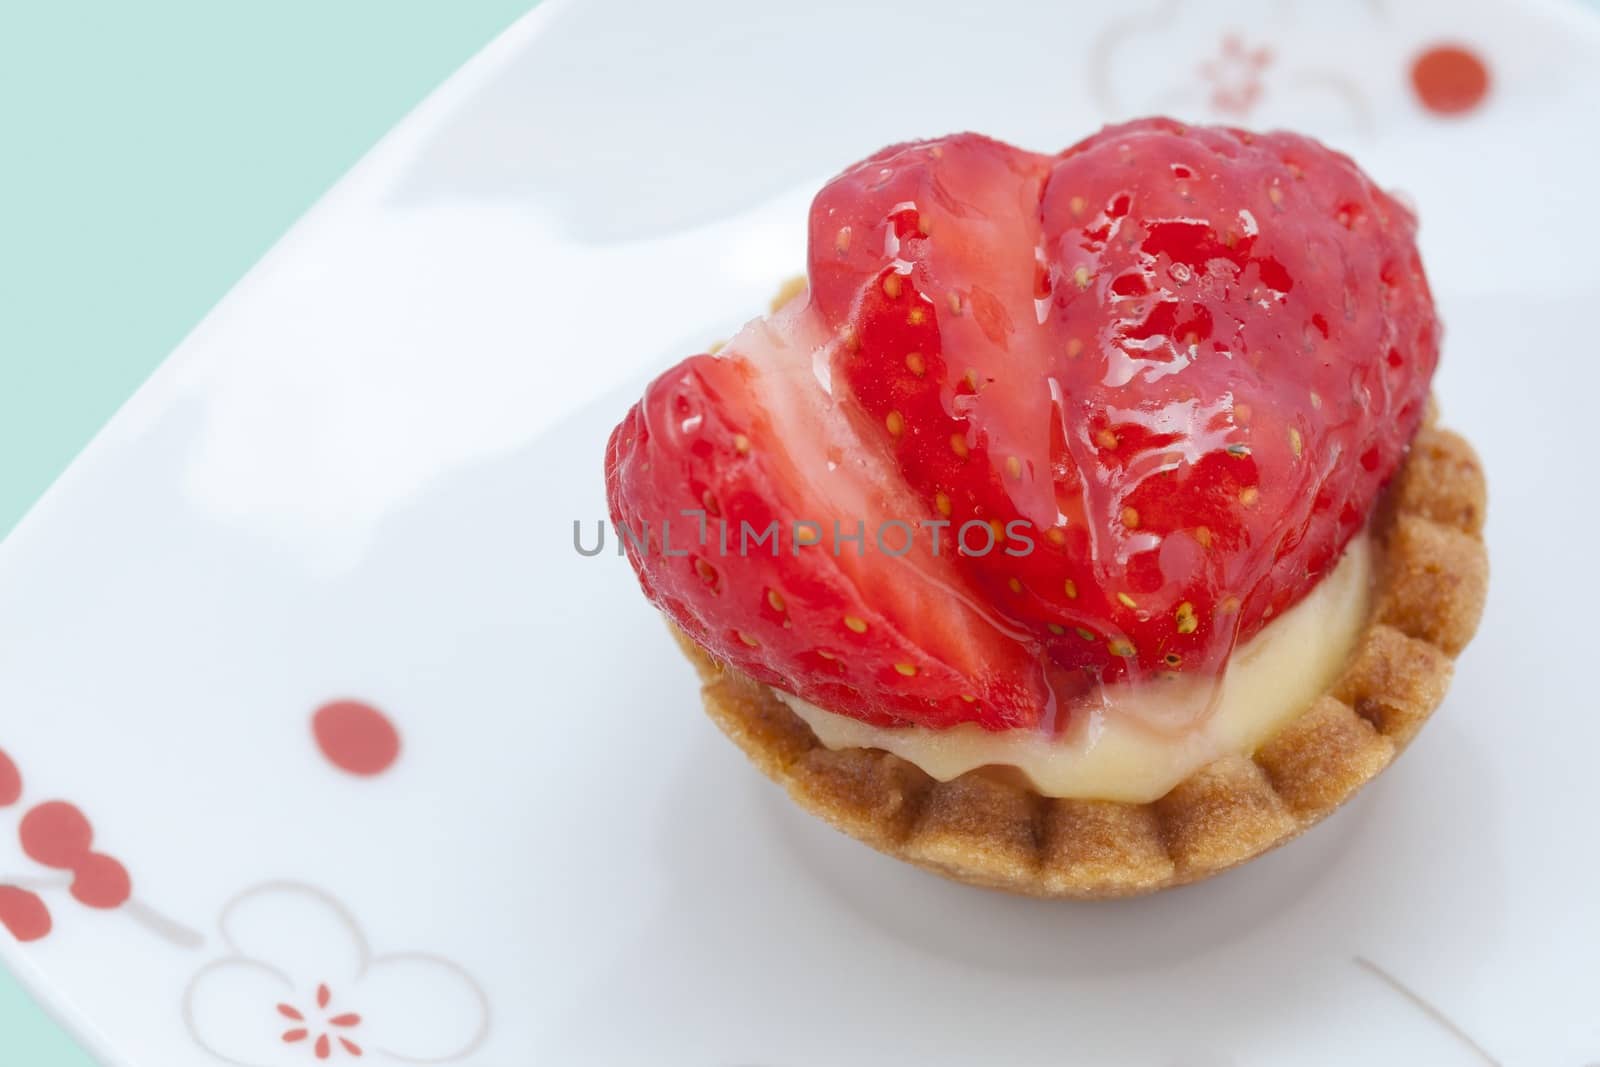 Picture of a baked dessert with strawberry